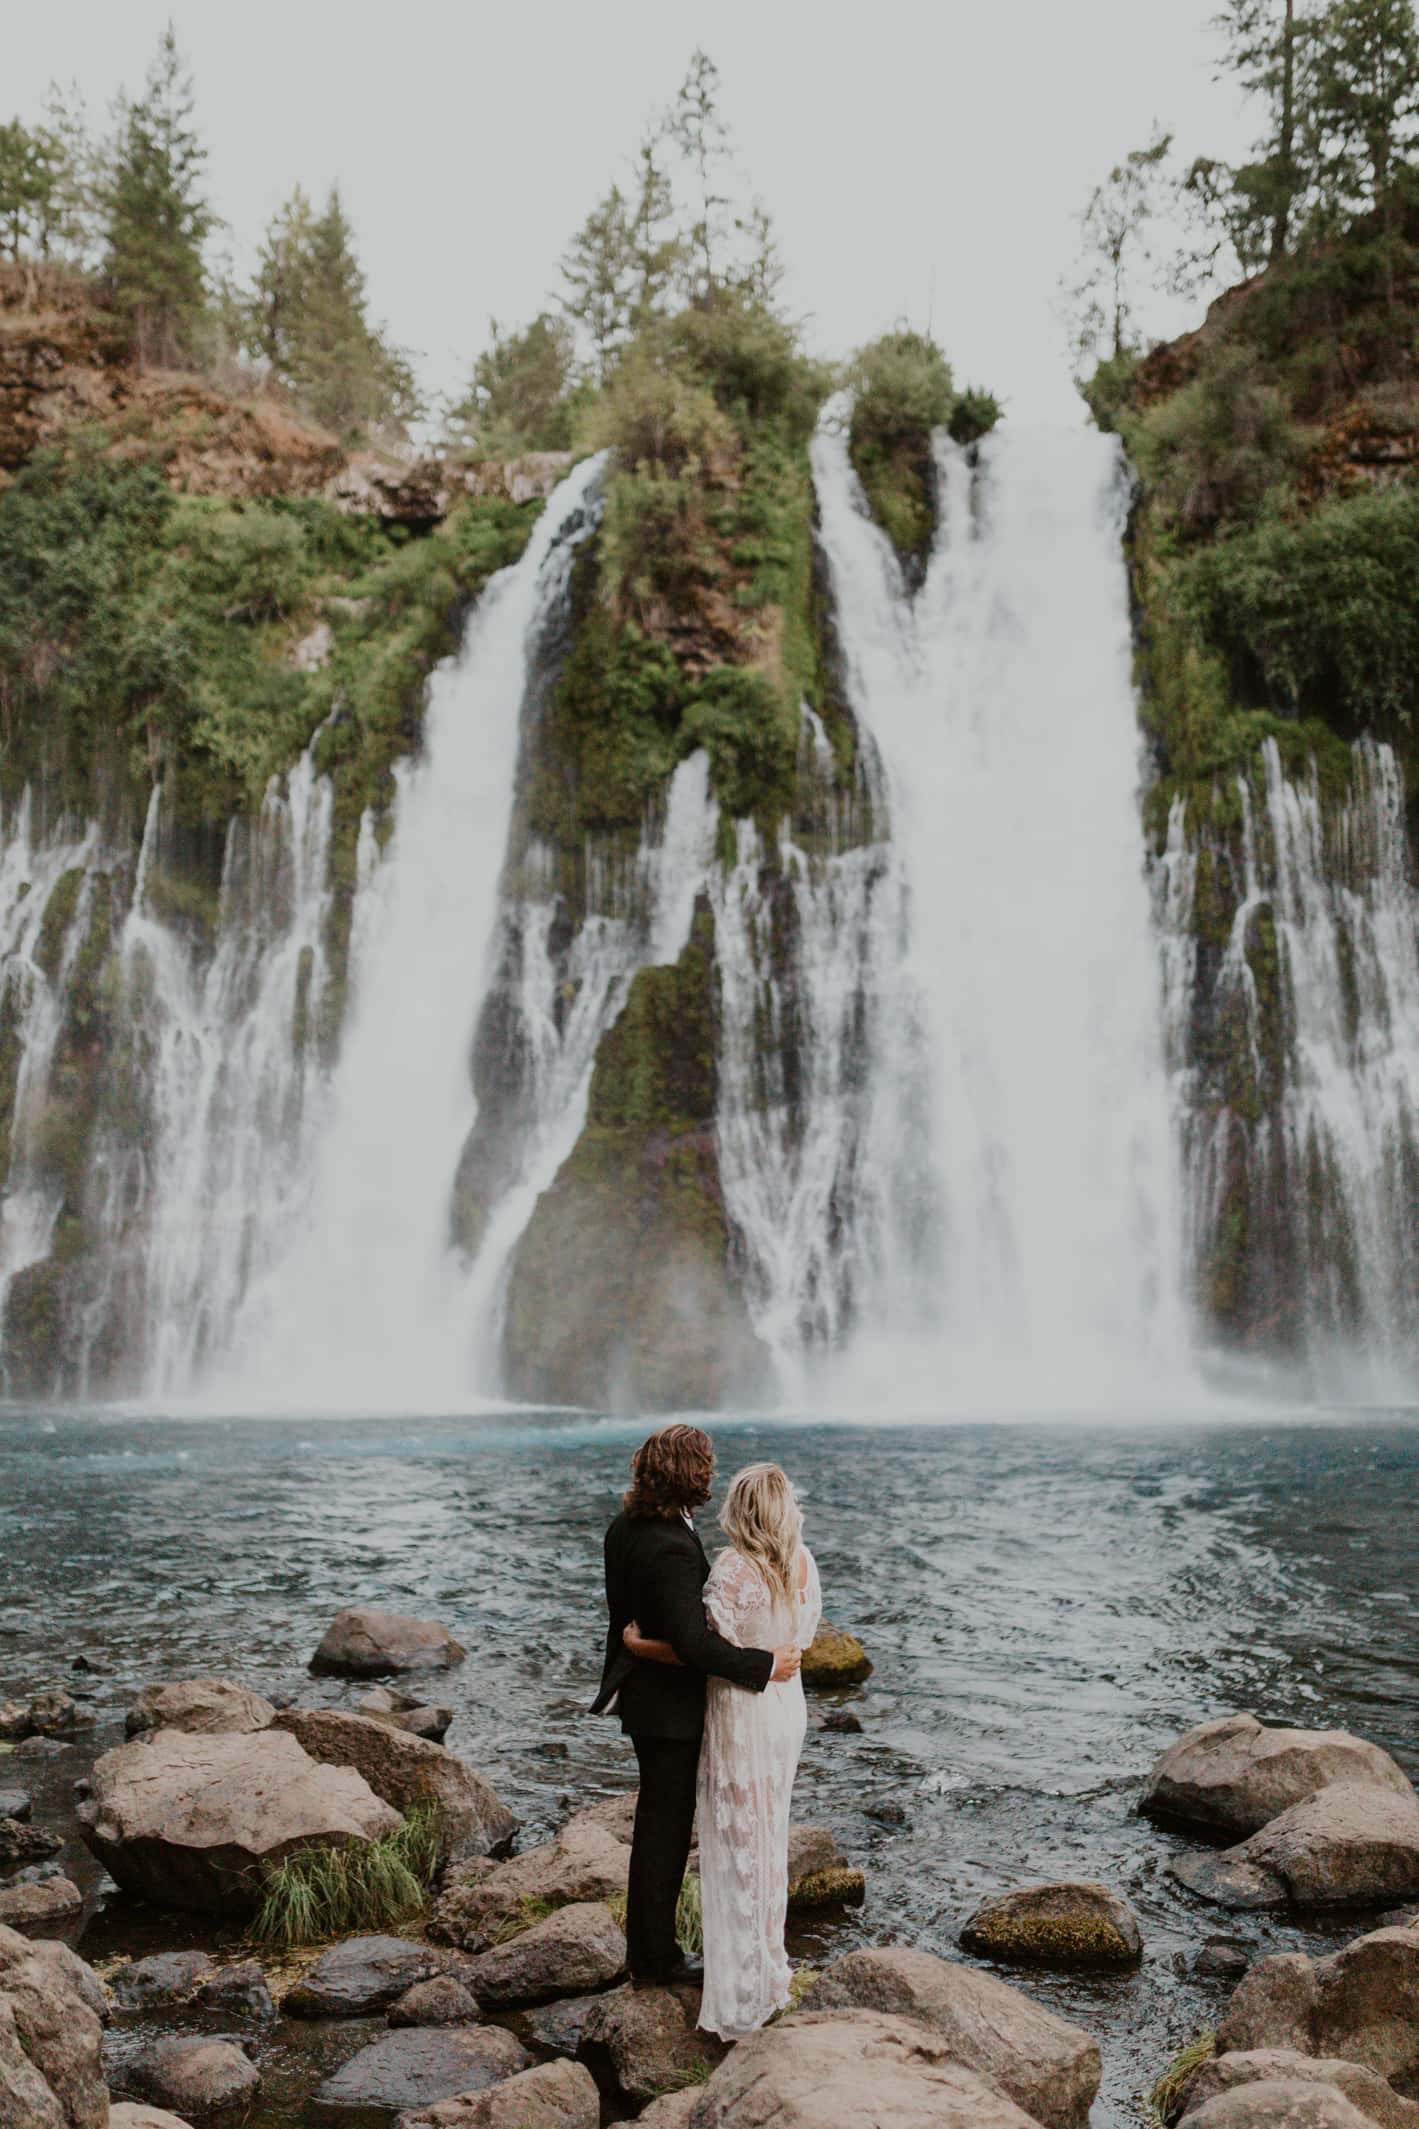 A bride and groom at Burney Falls on their elopement day in California.